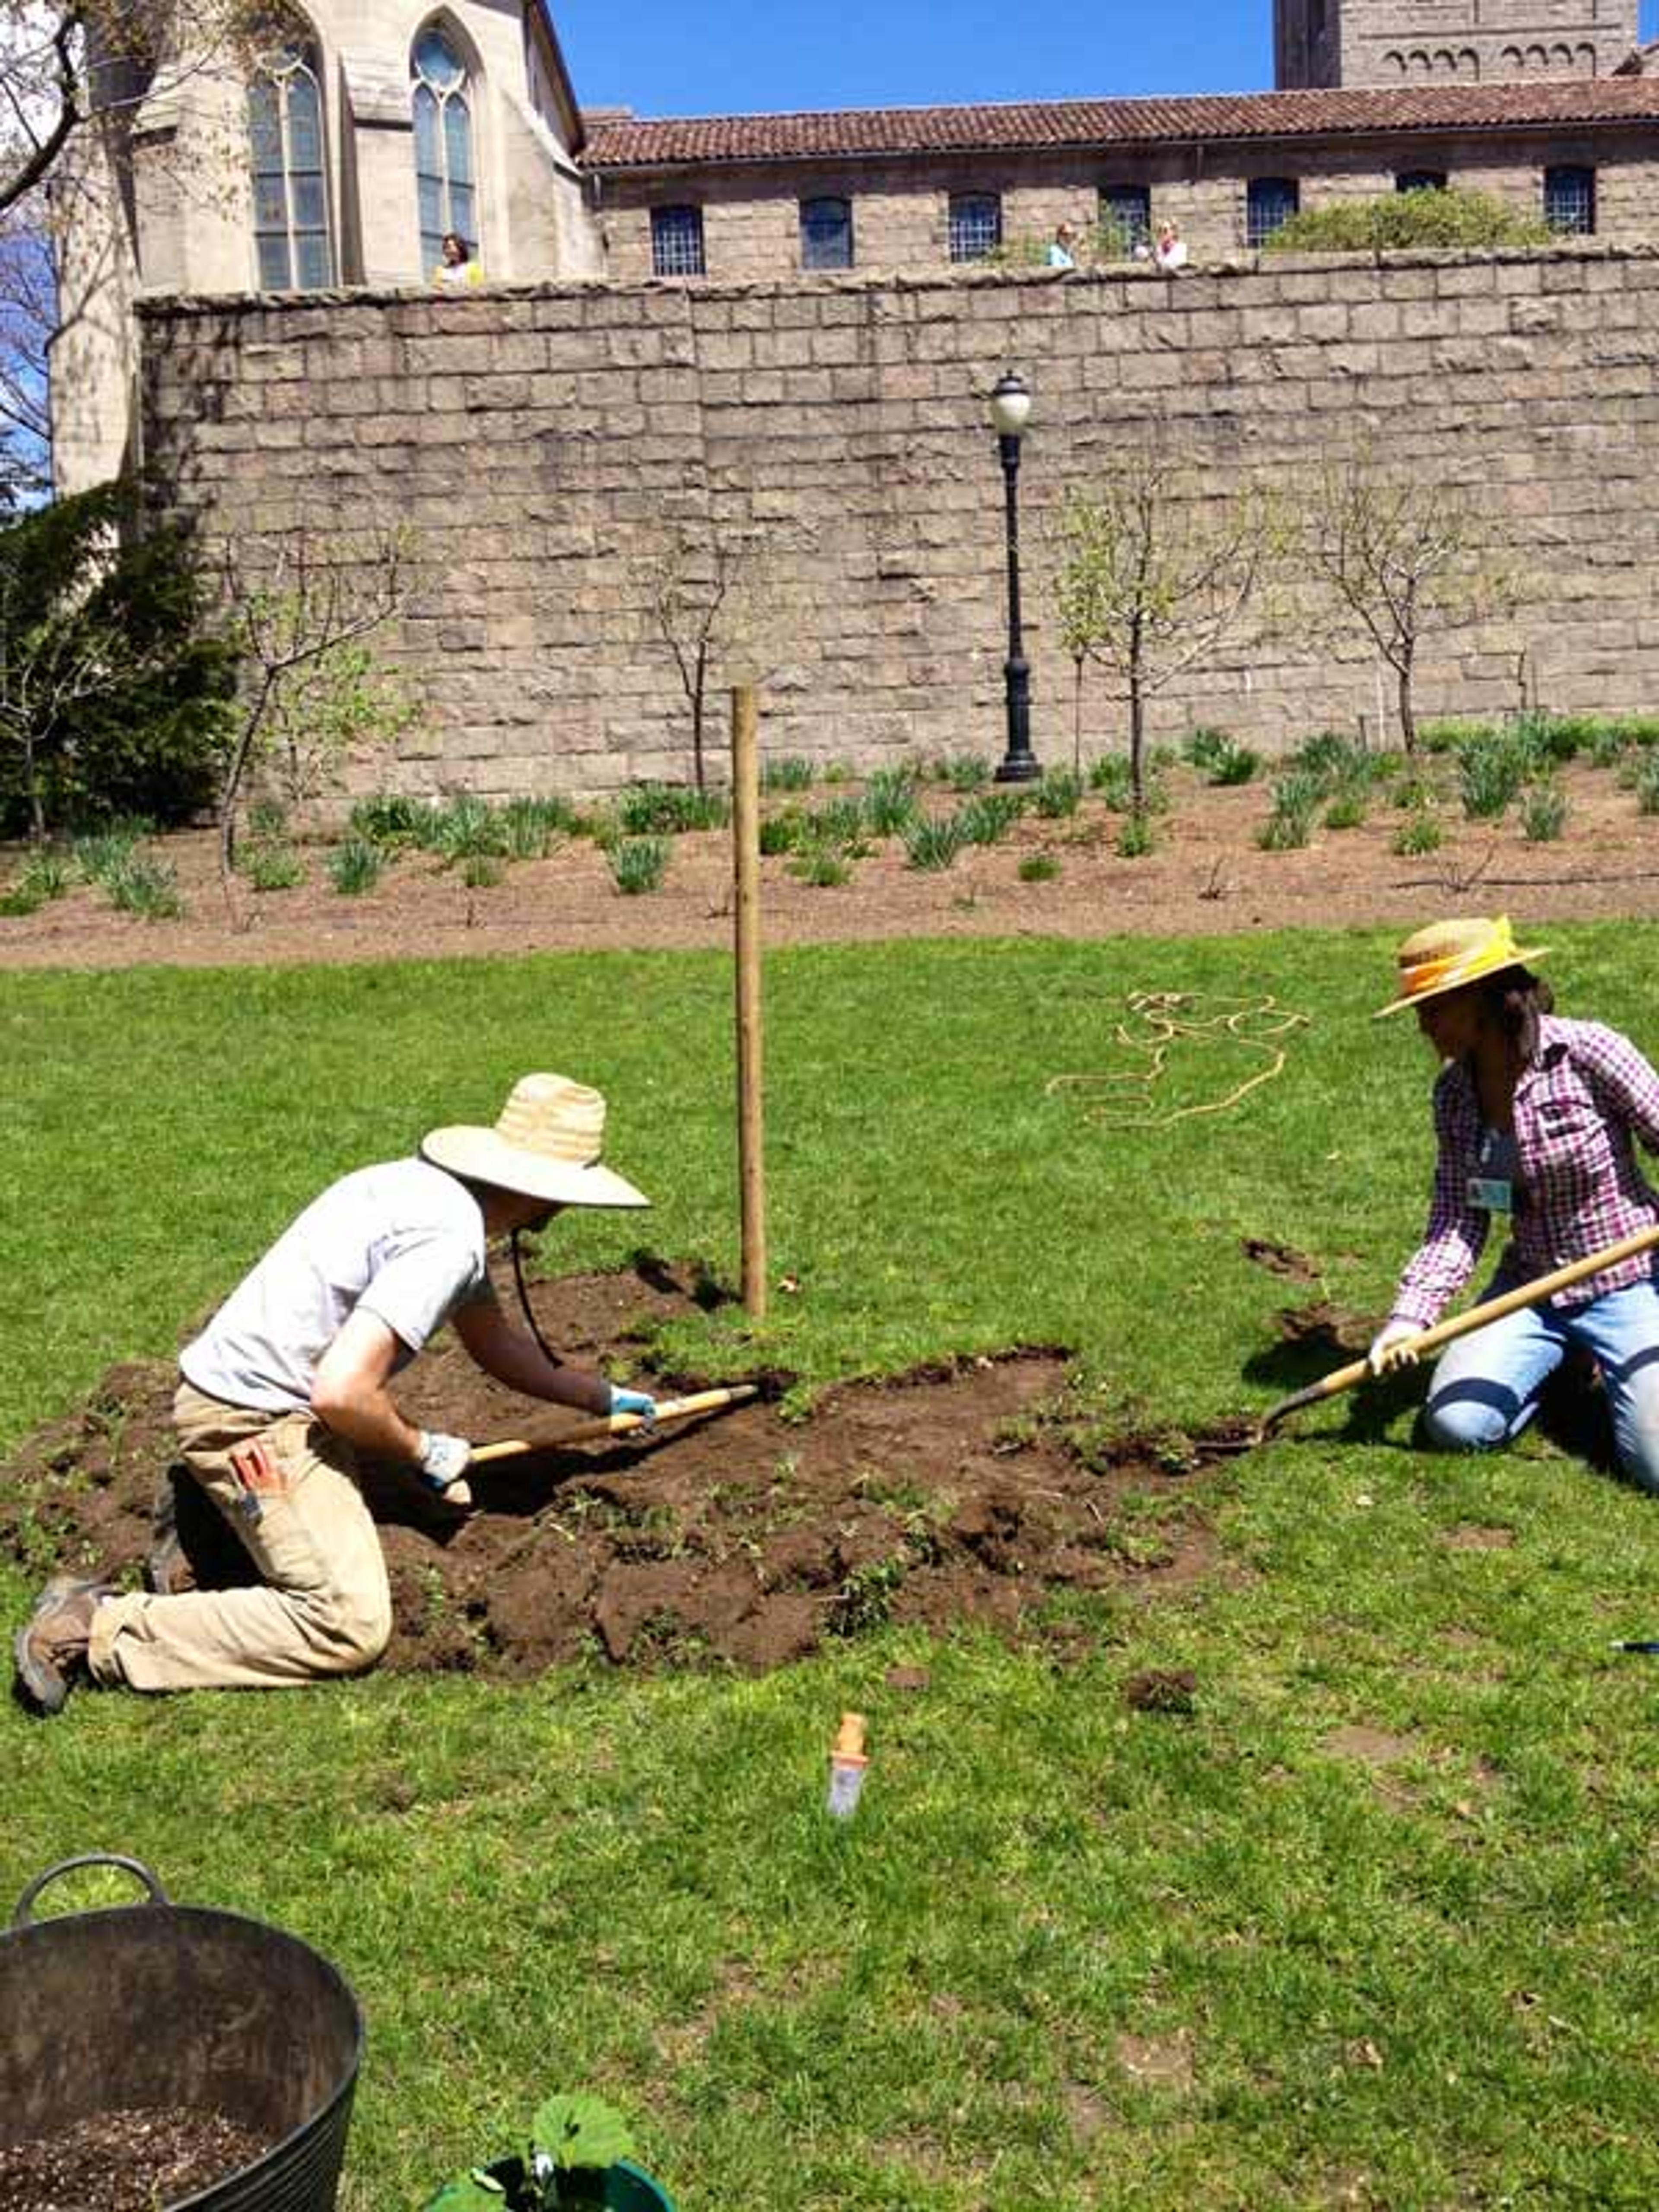 Gardeners remove sod in thin sheets to prepare a garden bed for new hops plants. Photograph by Caleb Leech